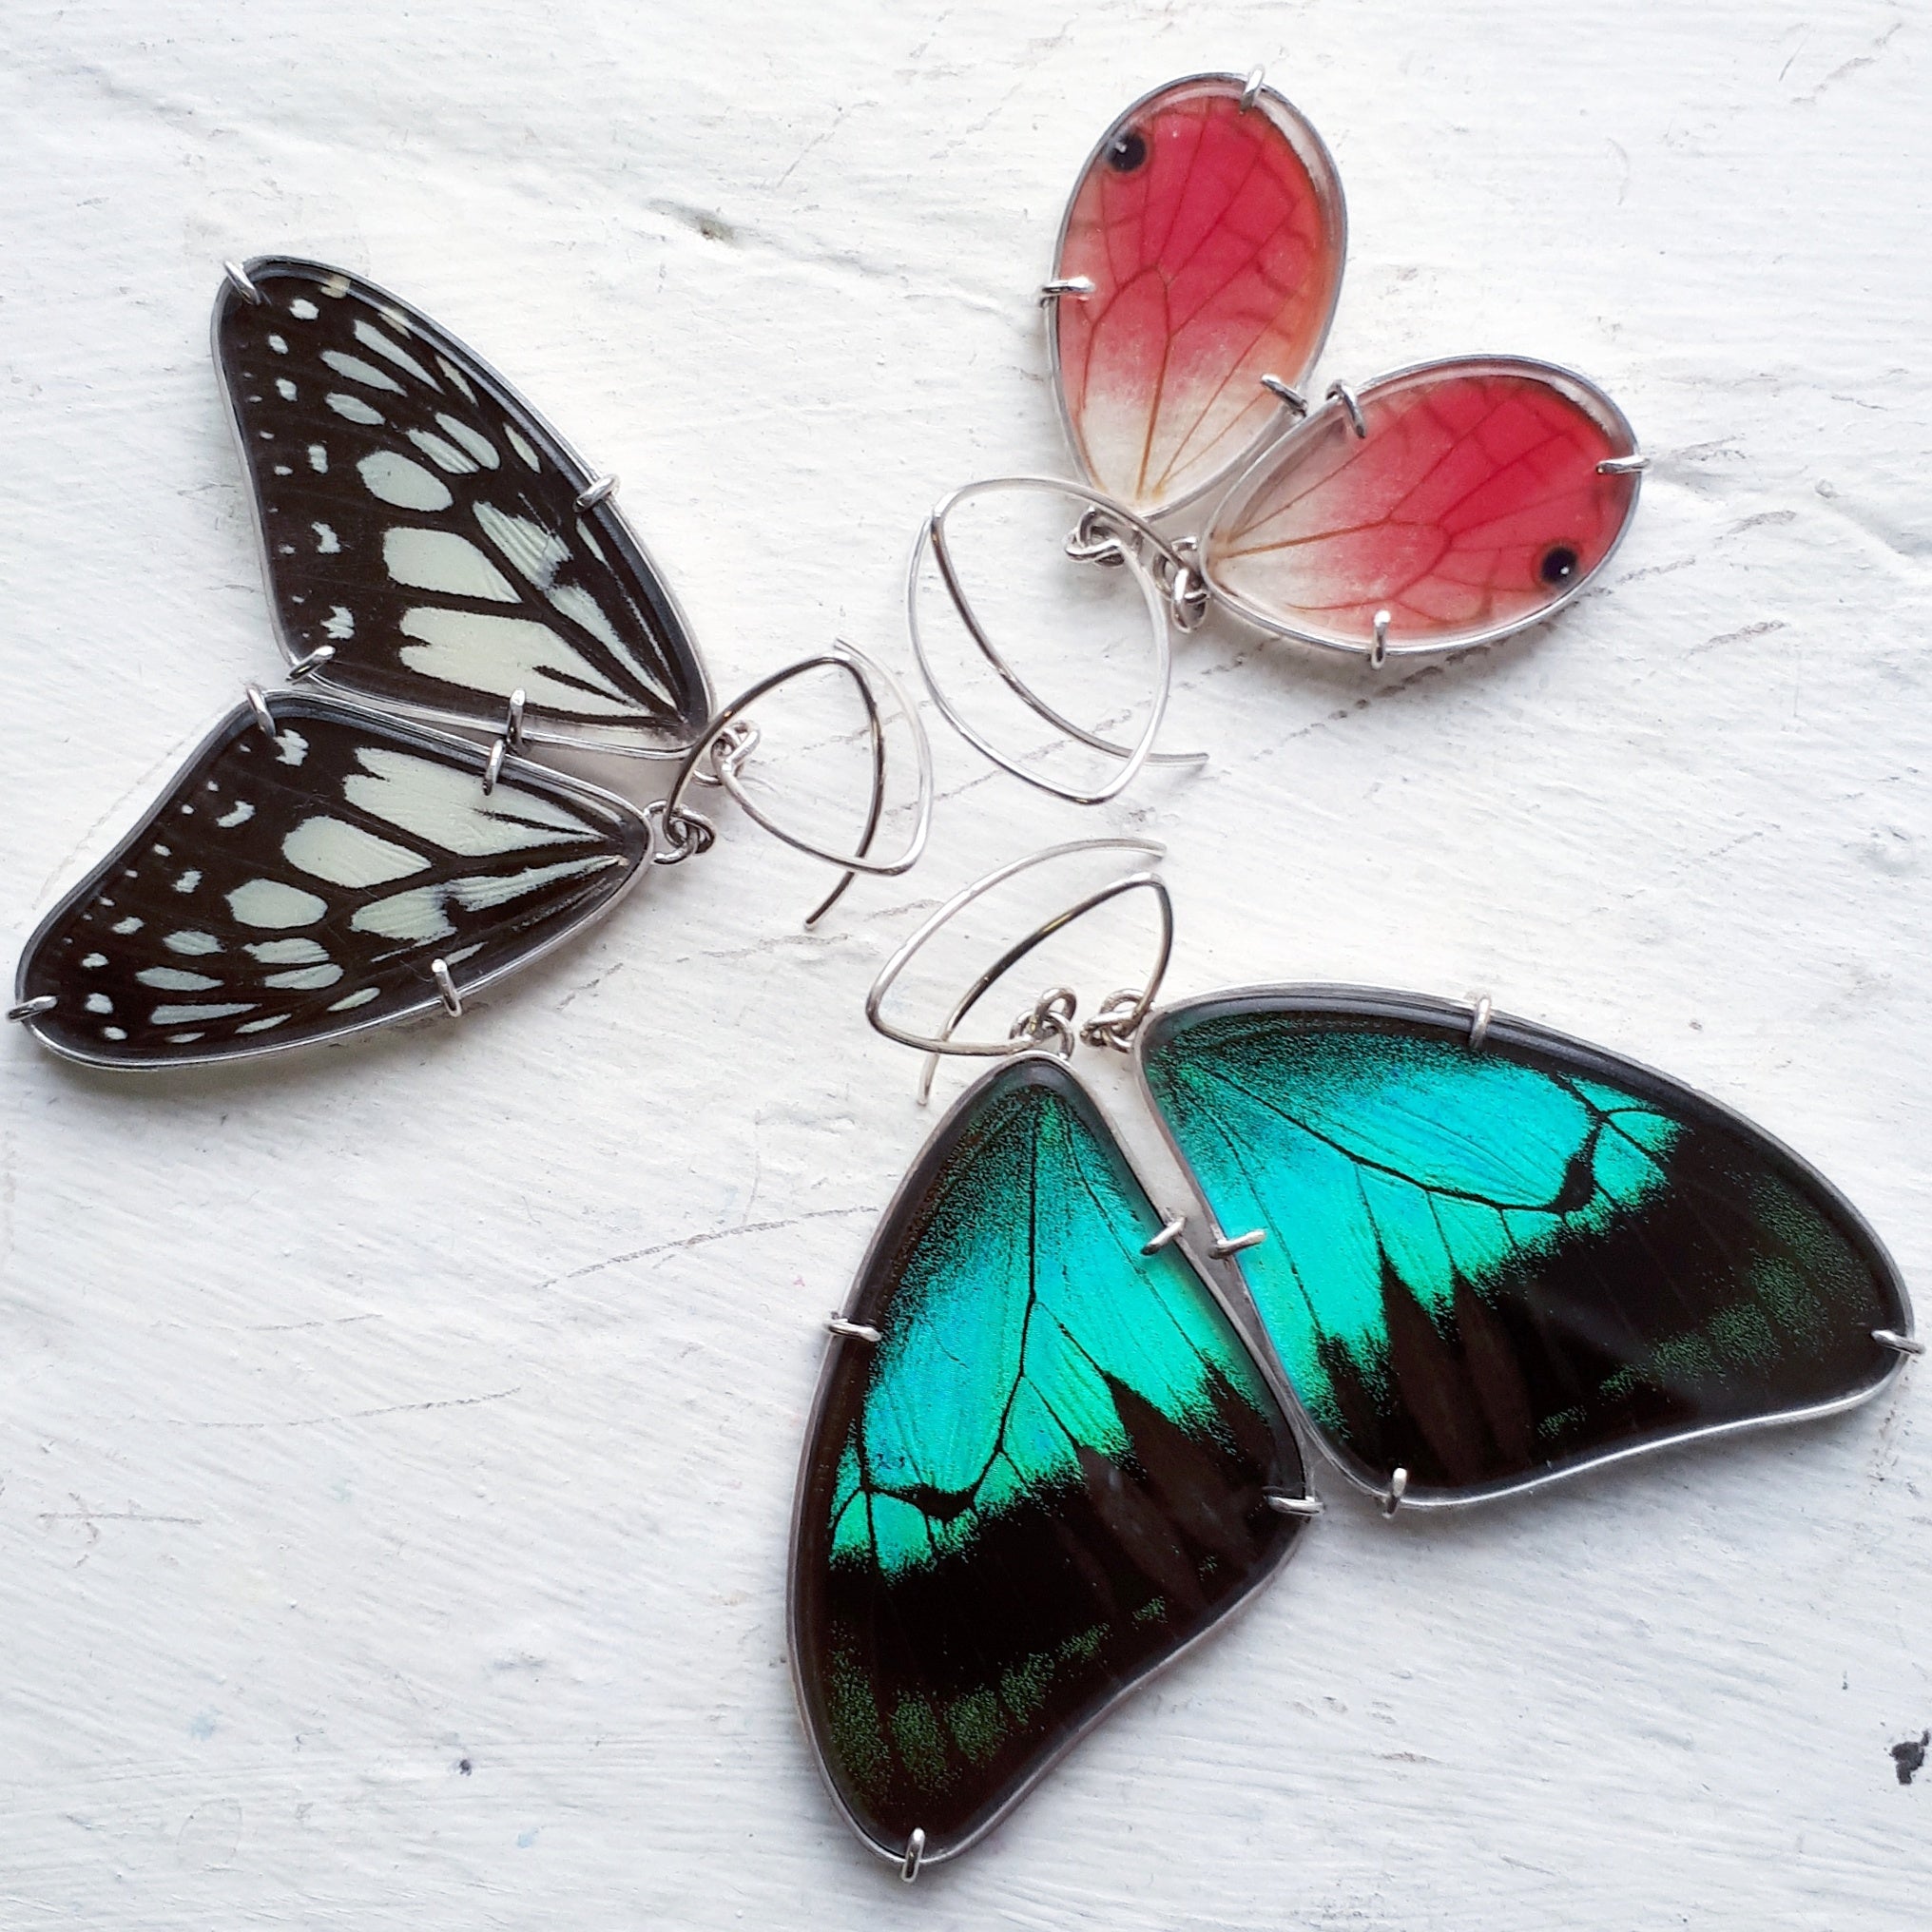 Three pairs of real butterfly wing earrings. The earrings are positioned to appear like three butterflies are facing each other, almost like a flower formation. The colours of the butterflies are pink, aqua, and black and white.